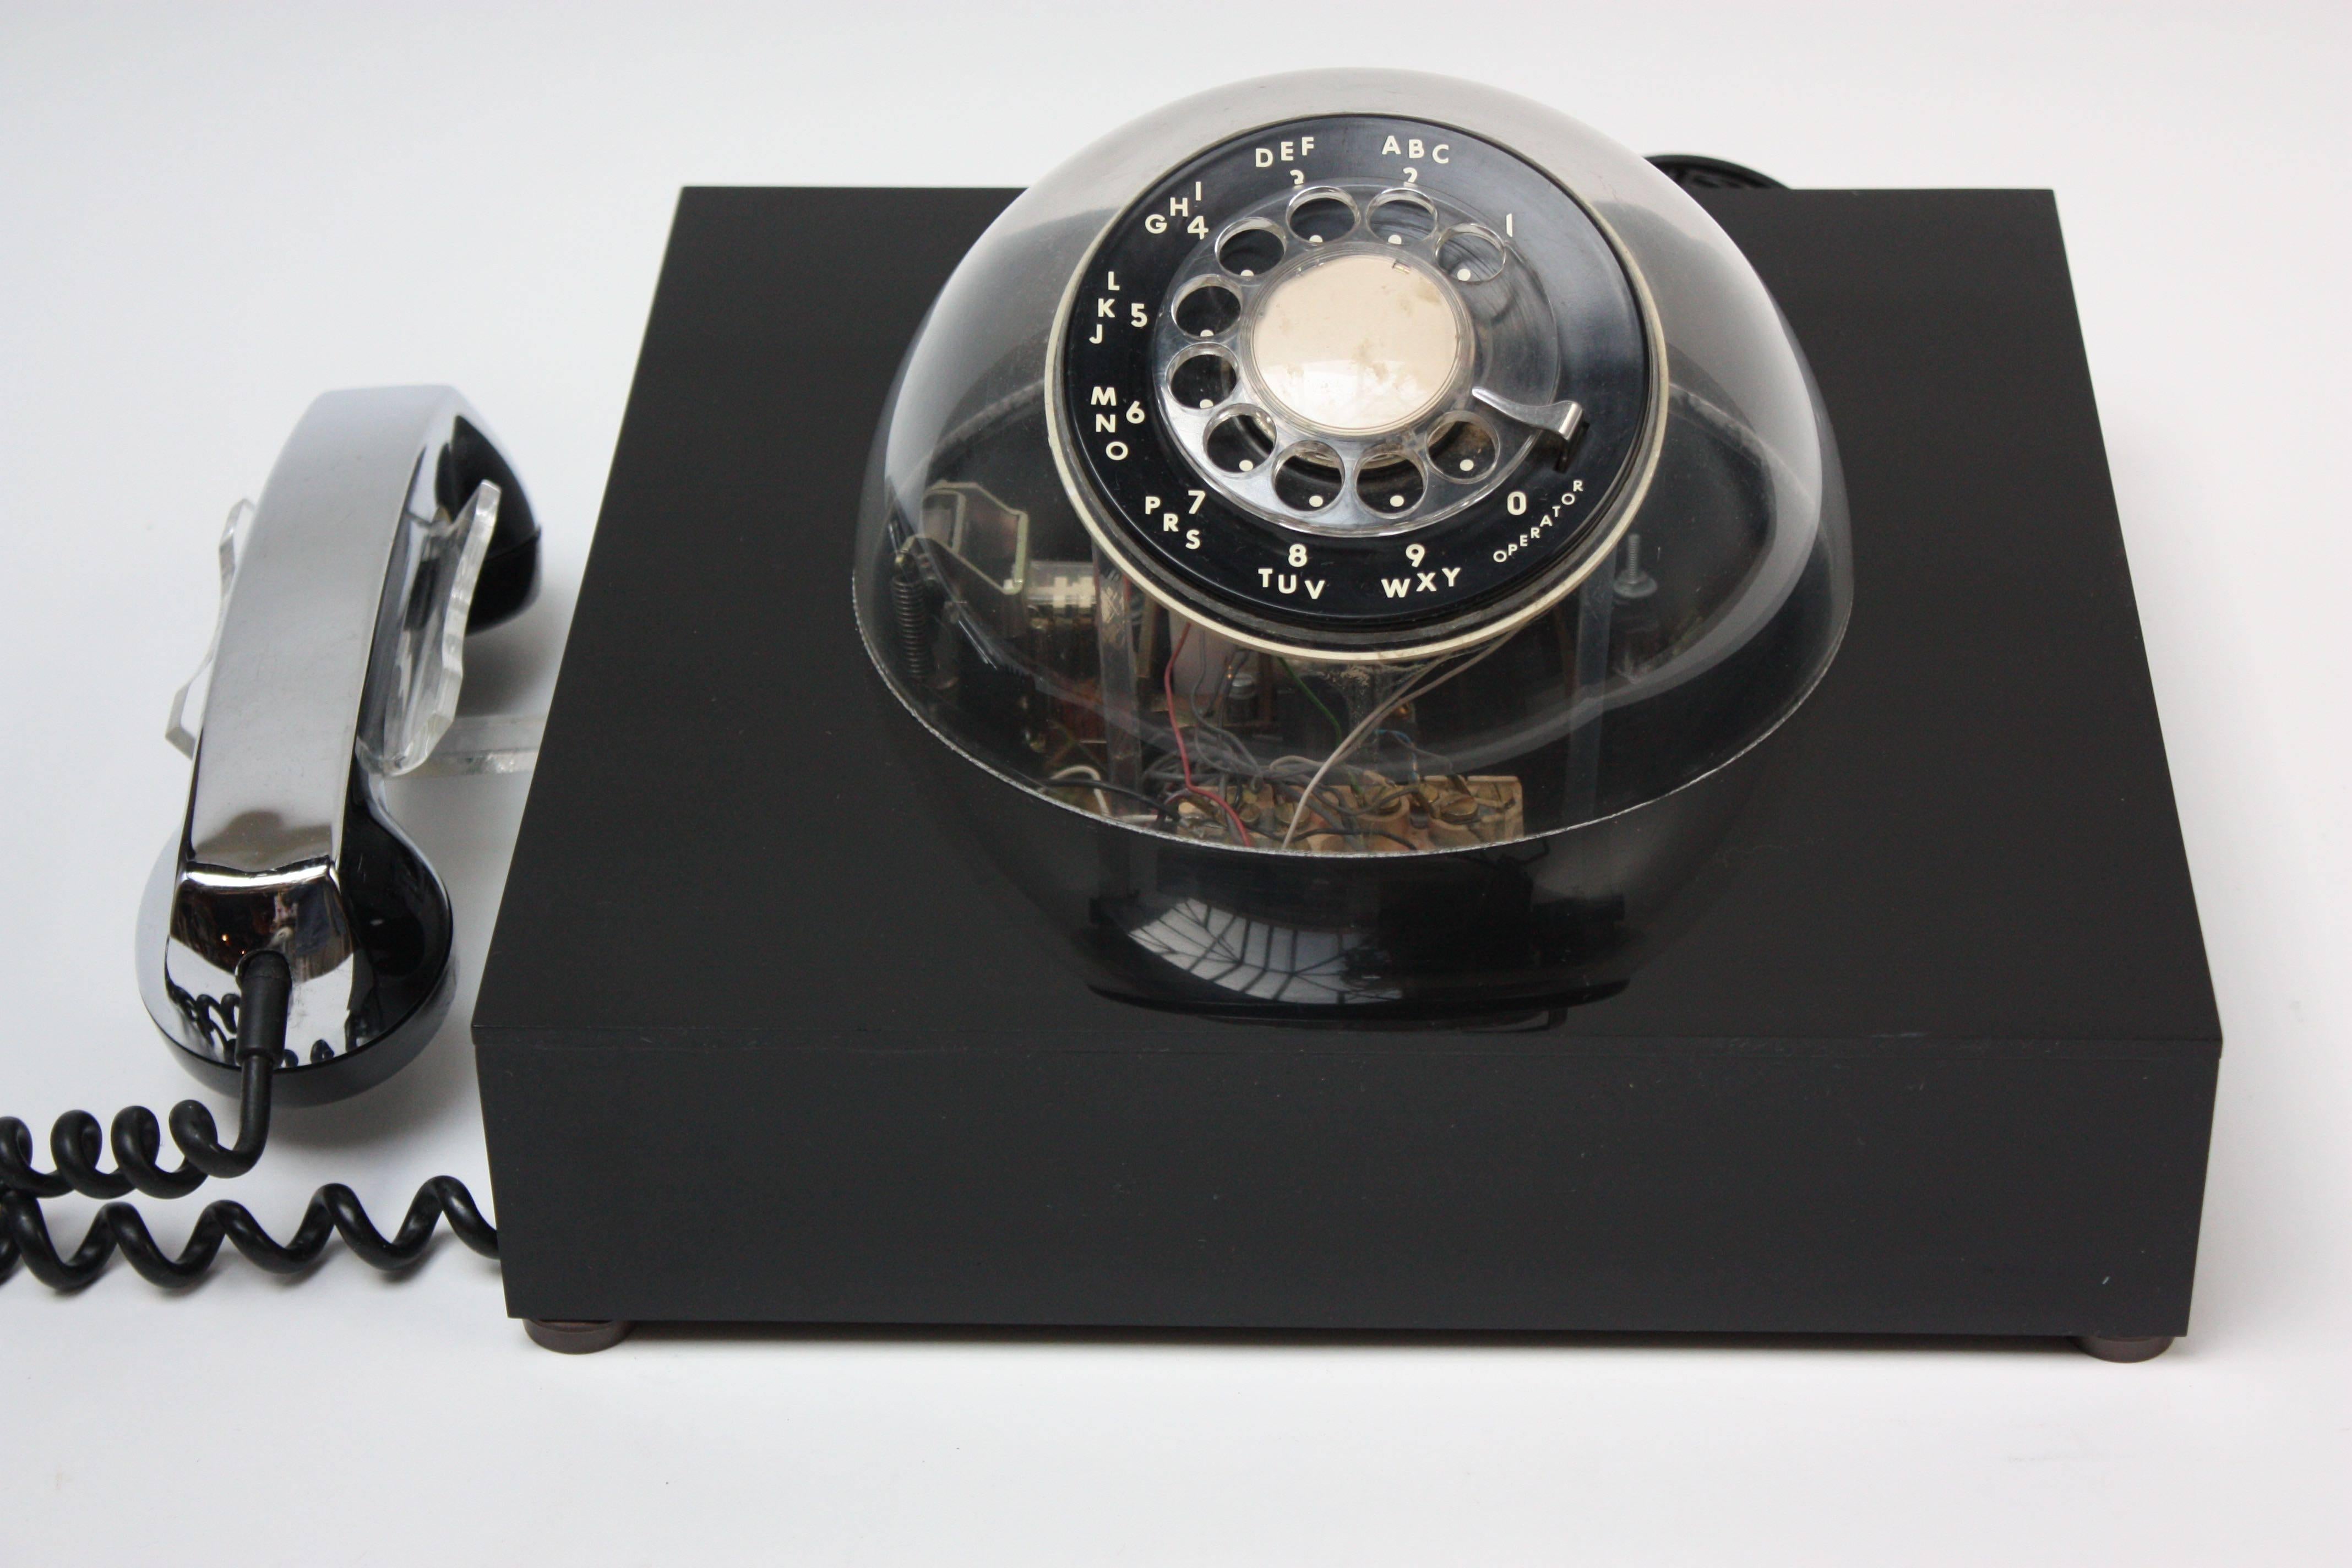 This futuristic Teledome (model #3005) phone was patented and manufactured in 1972 by Teleconcepts and included internals made by Northern Telecom Inc. Chrome-plate handset with black acrylic box and clear plastic dome for accessible view of